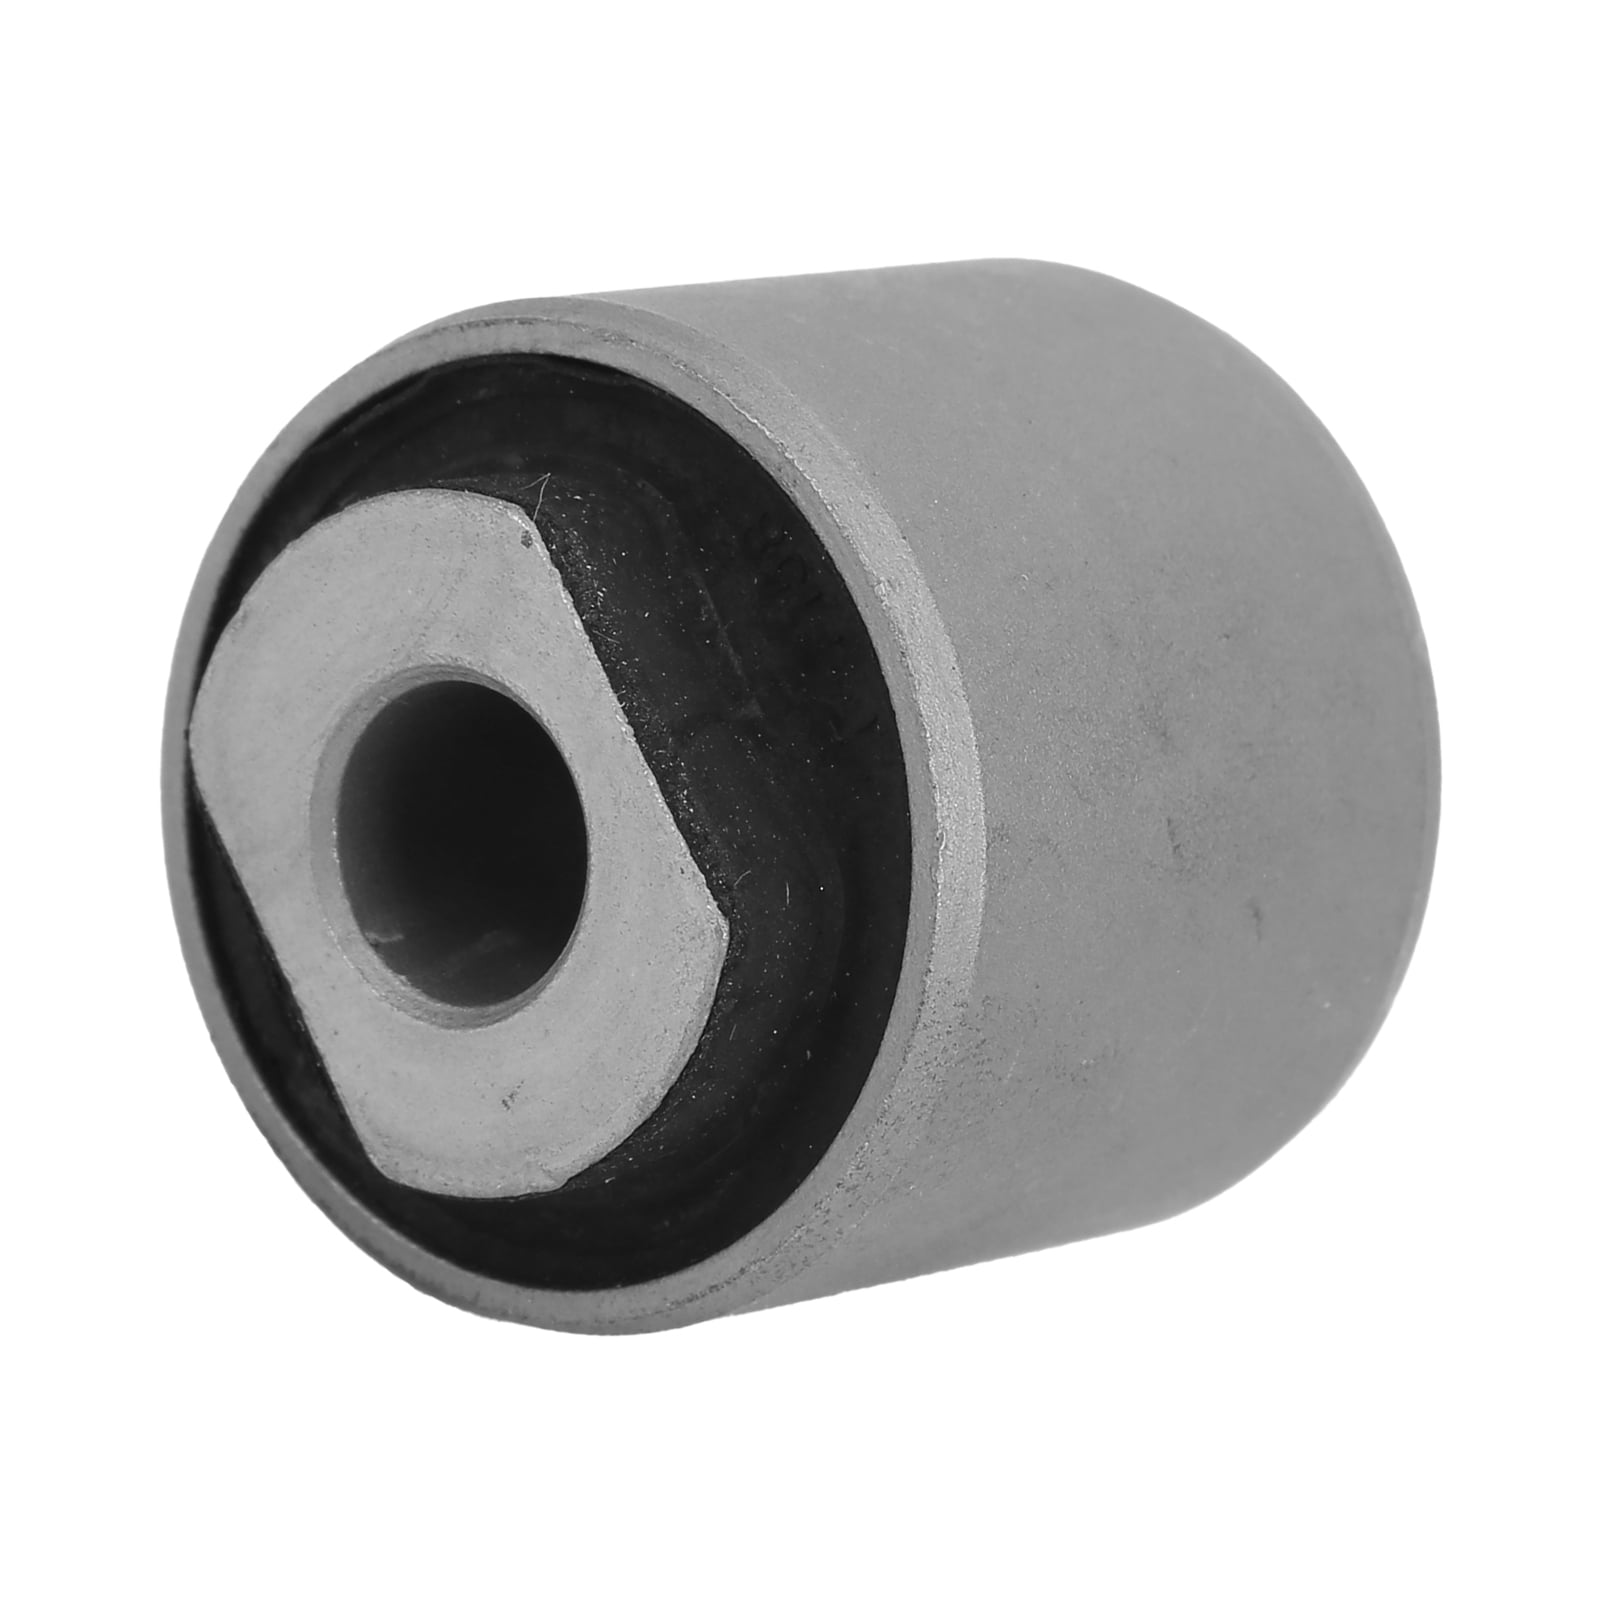 Suspension Lateral Link Bushing 20250-ae060 Parts Suspension Lateral Link Bushing Replacement Sab‑b12r5 0825‑b13r Suspension Lateral Link Bushing 